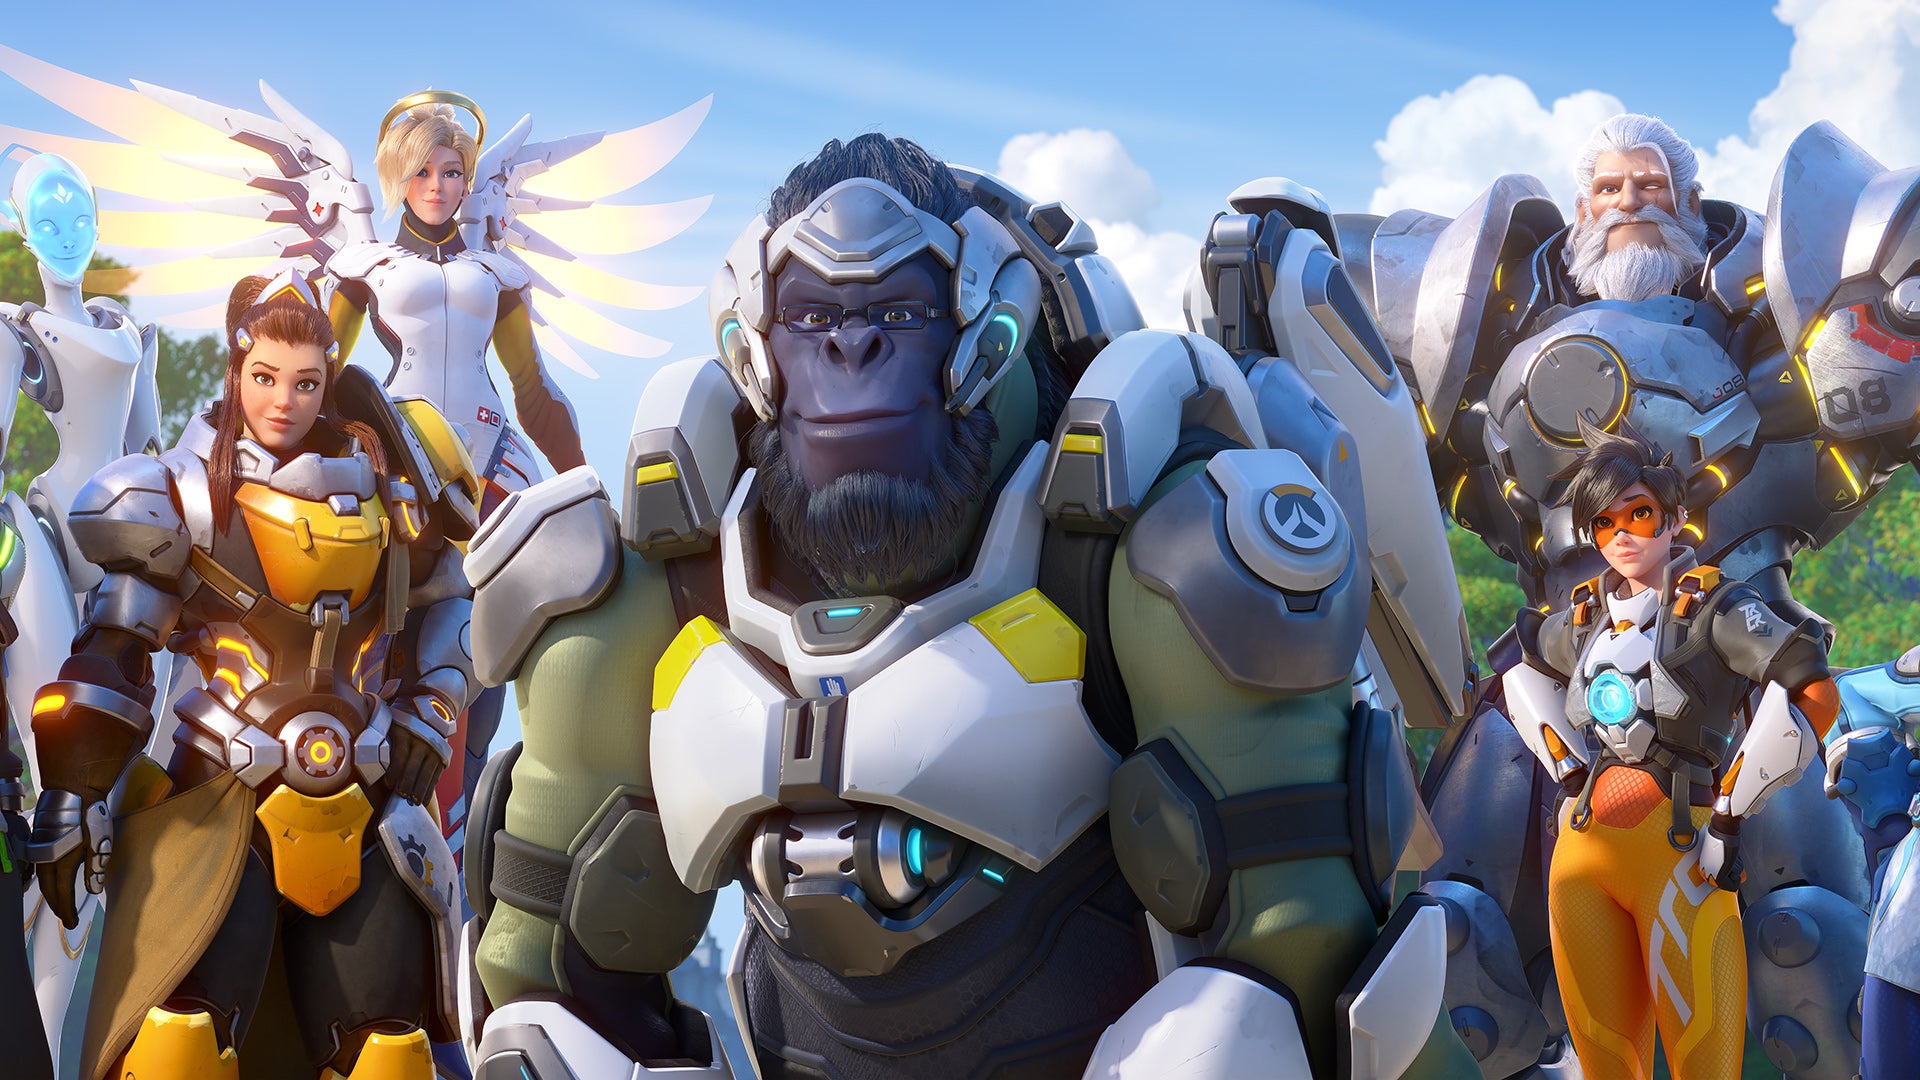 Overwatch 2 is a game with a lot of moving parts and variables, but knowing your team and how to accommodate for their strengths and weaknesses can make the best of any situation. (Image: Blizzard Entertainment)